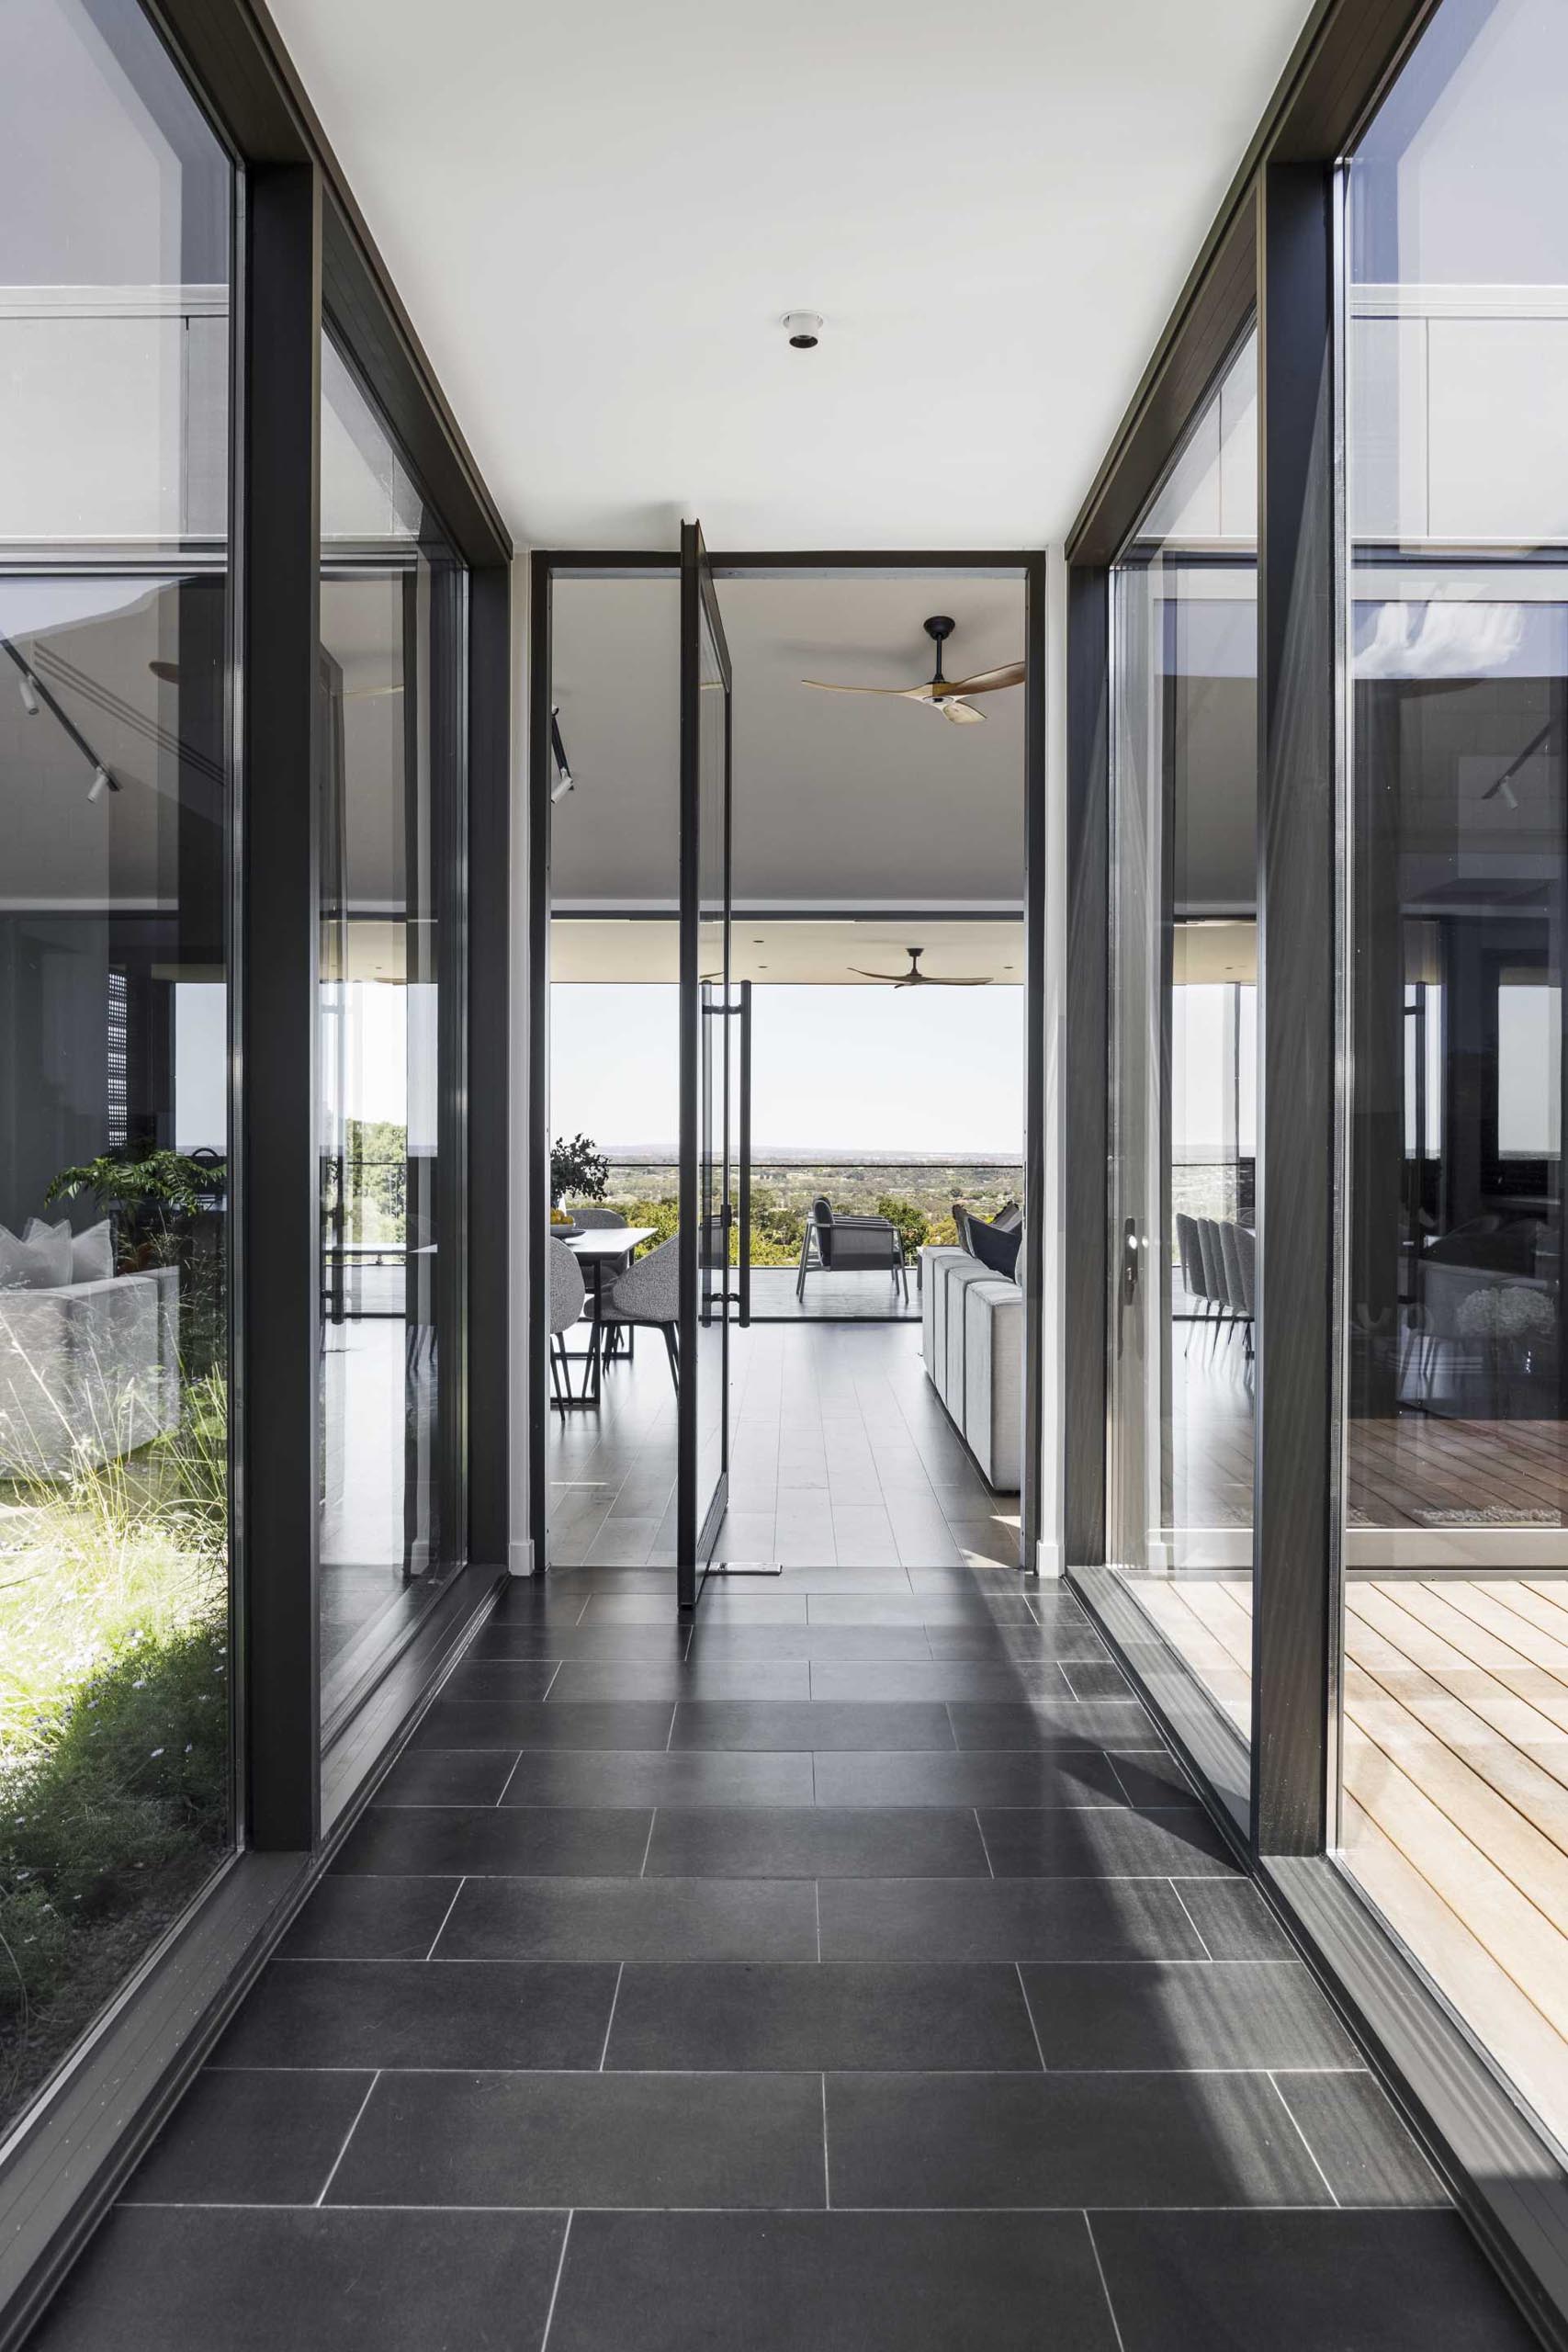 A modern corridor opens up to a glass-lined walkway where a pivoting glass door welcomes people to the open plan social areas.